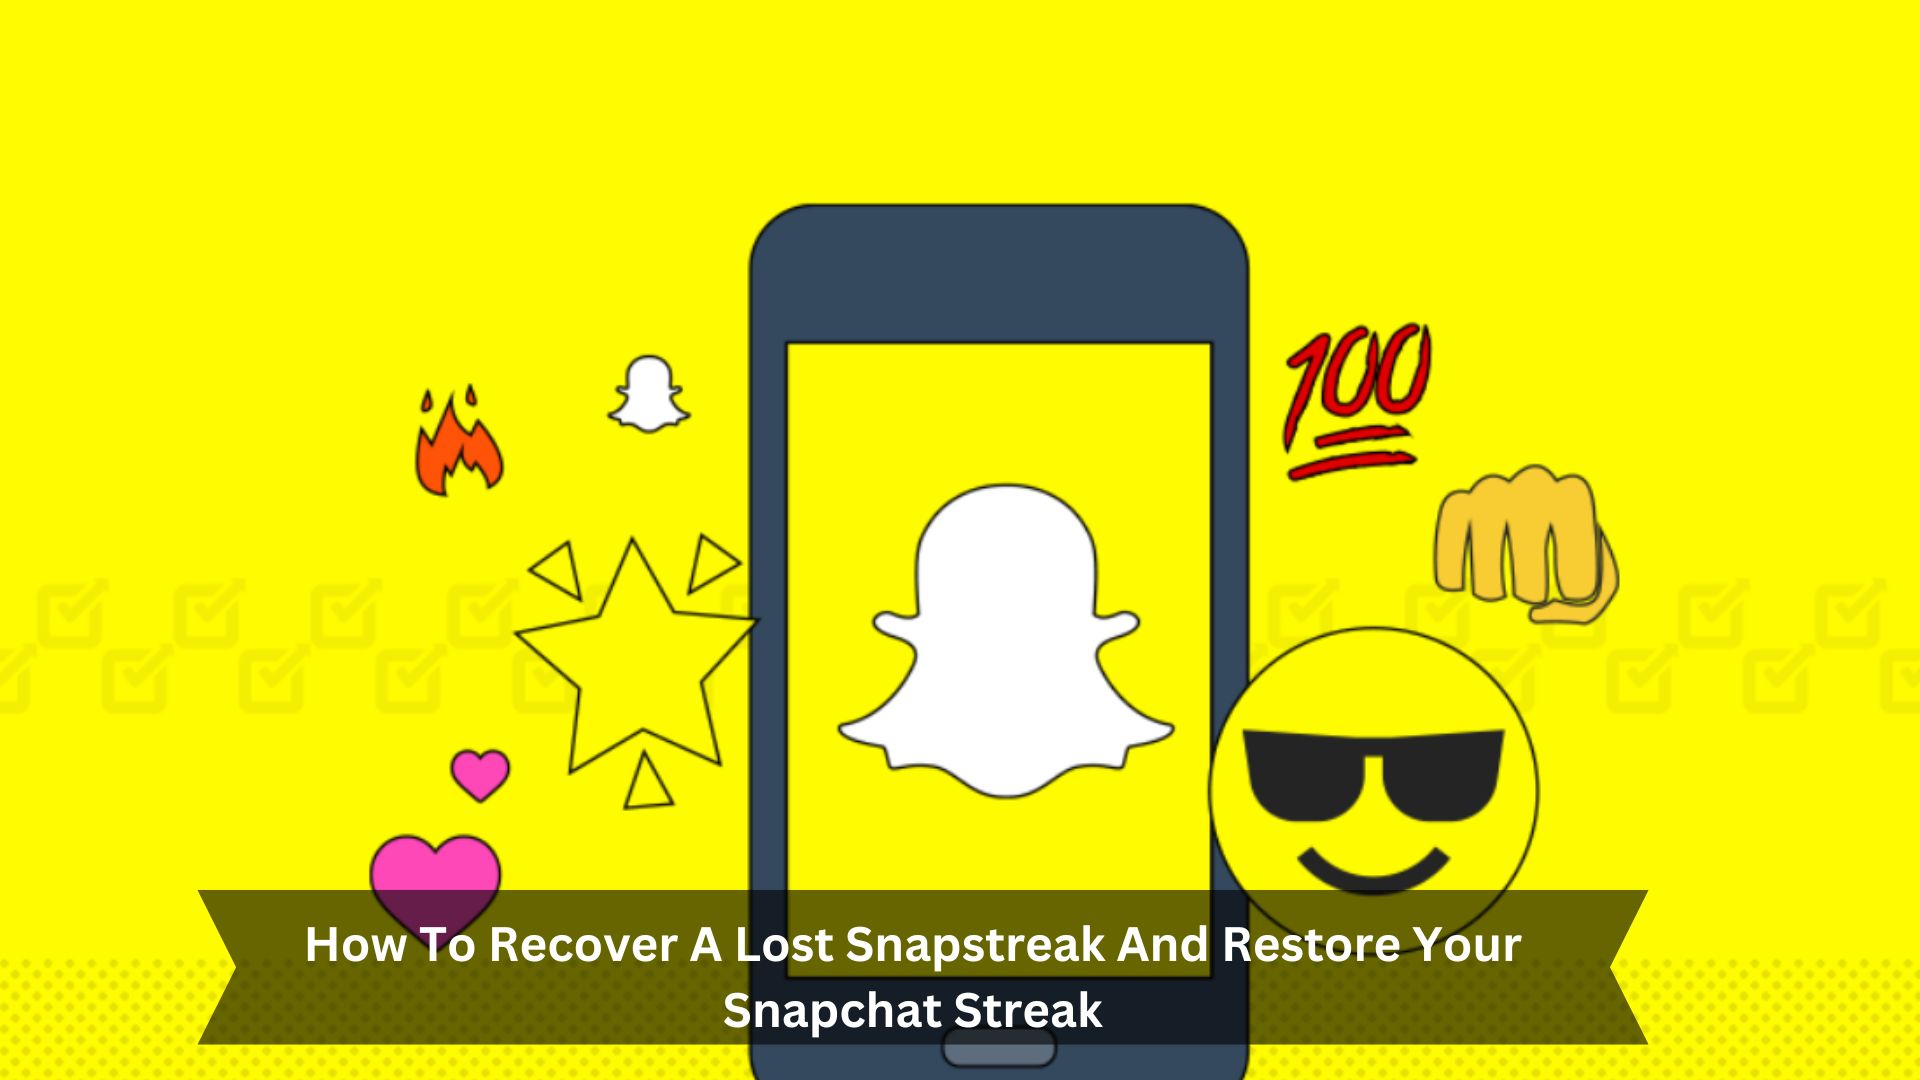 How-To-Recover-A-Lost-Snapstreak-And-Restore-Your-Snapchat-Streak